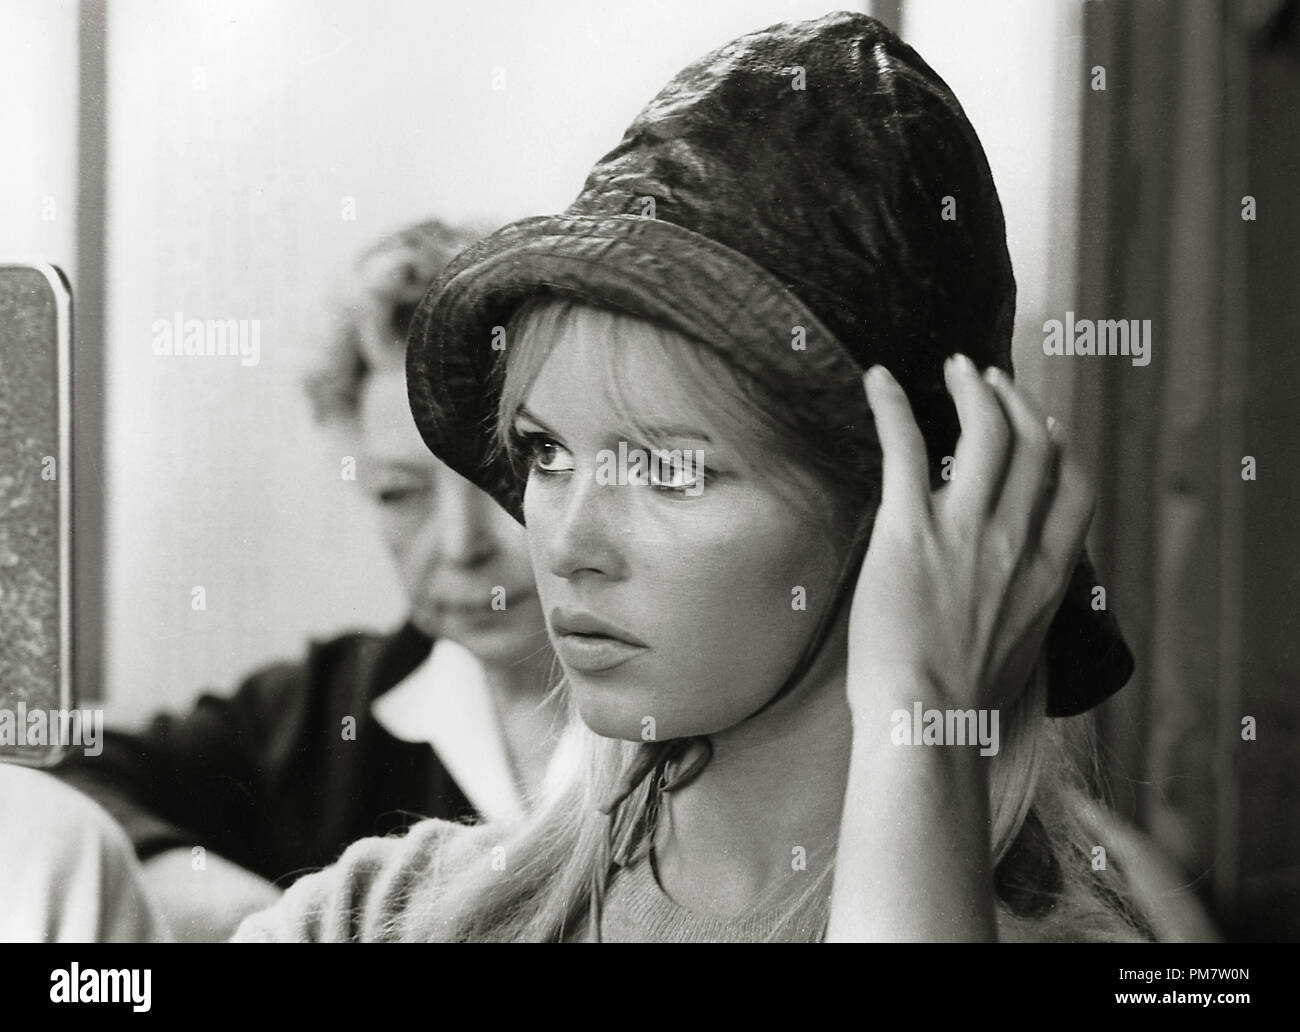 A_brigitte hires stock photography and images Alamy